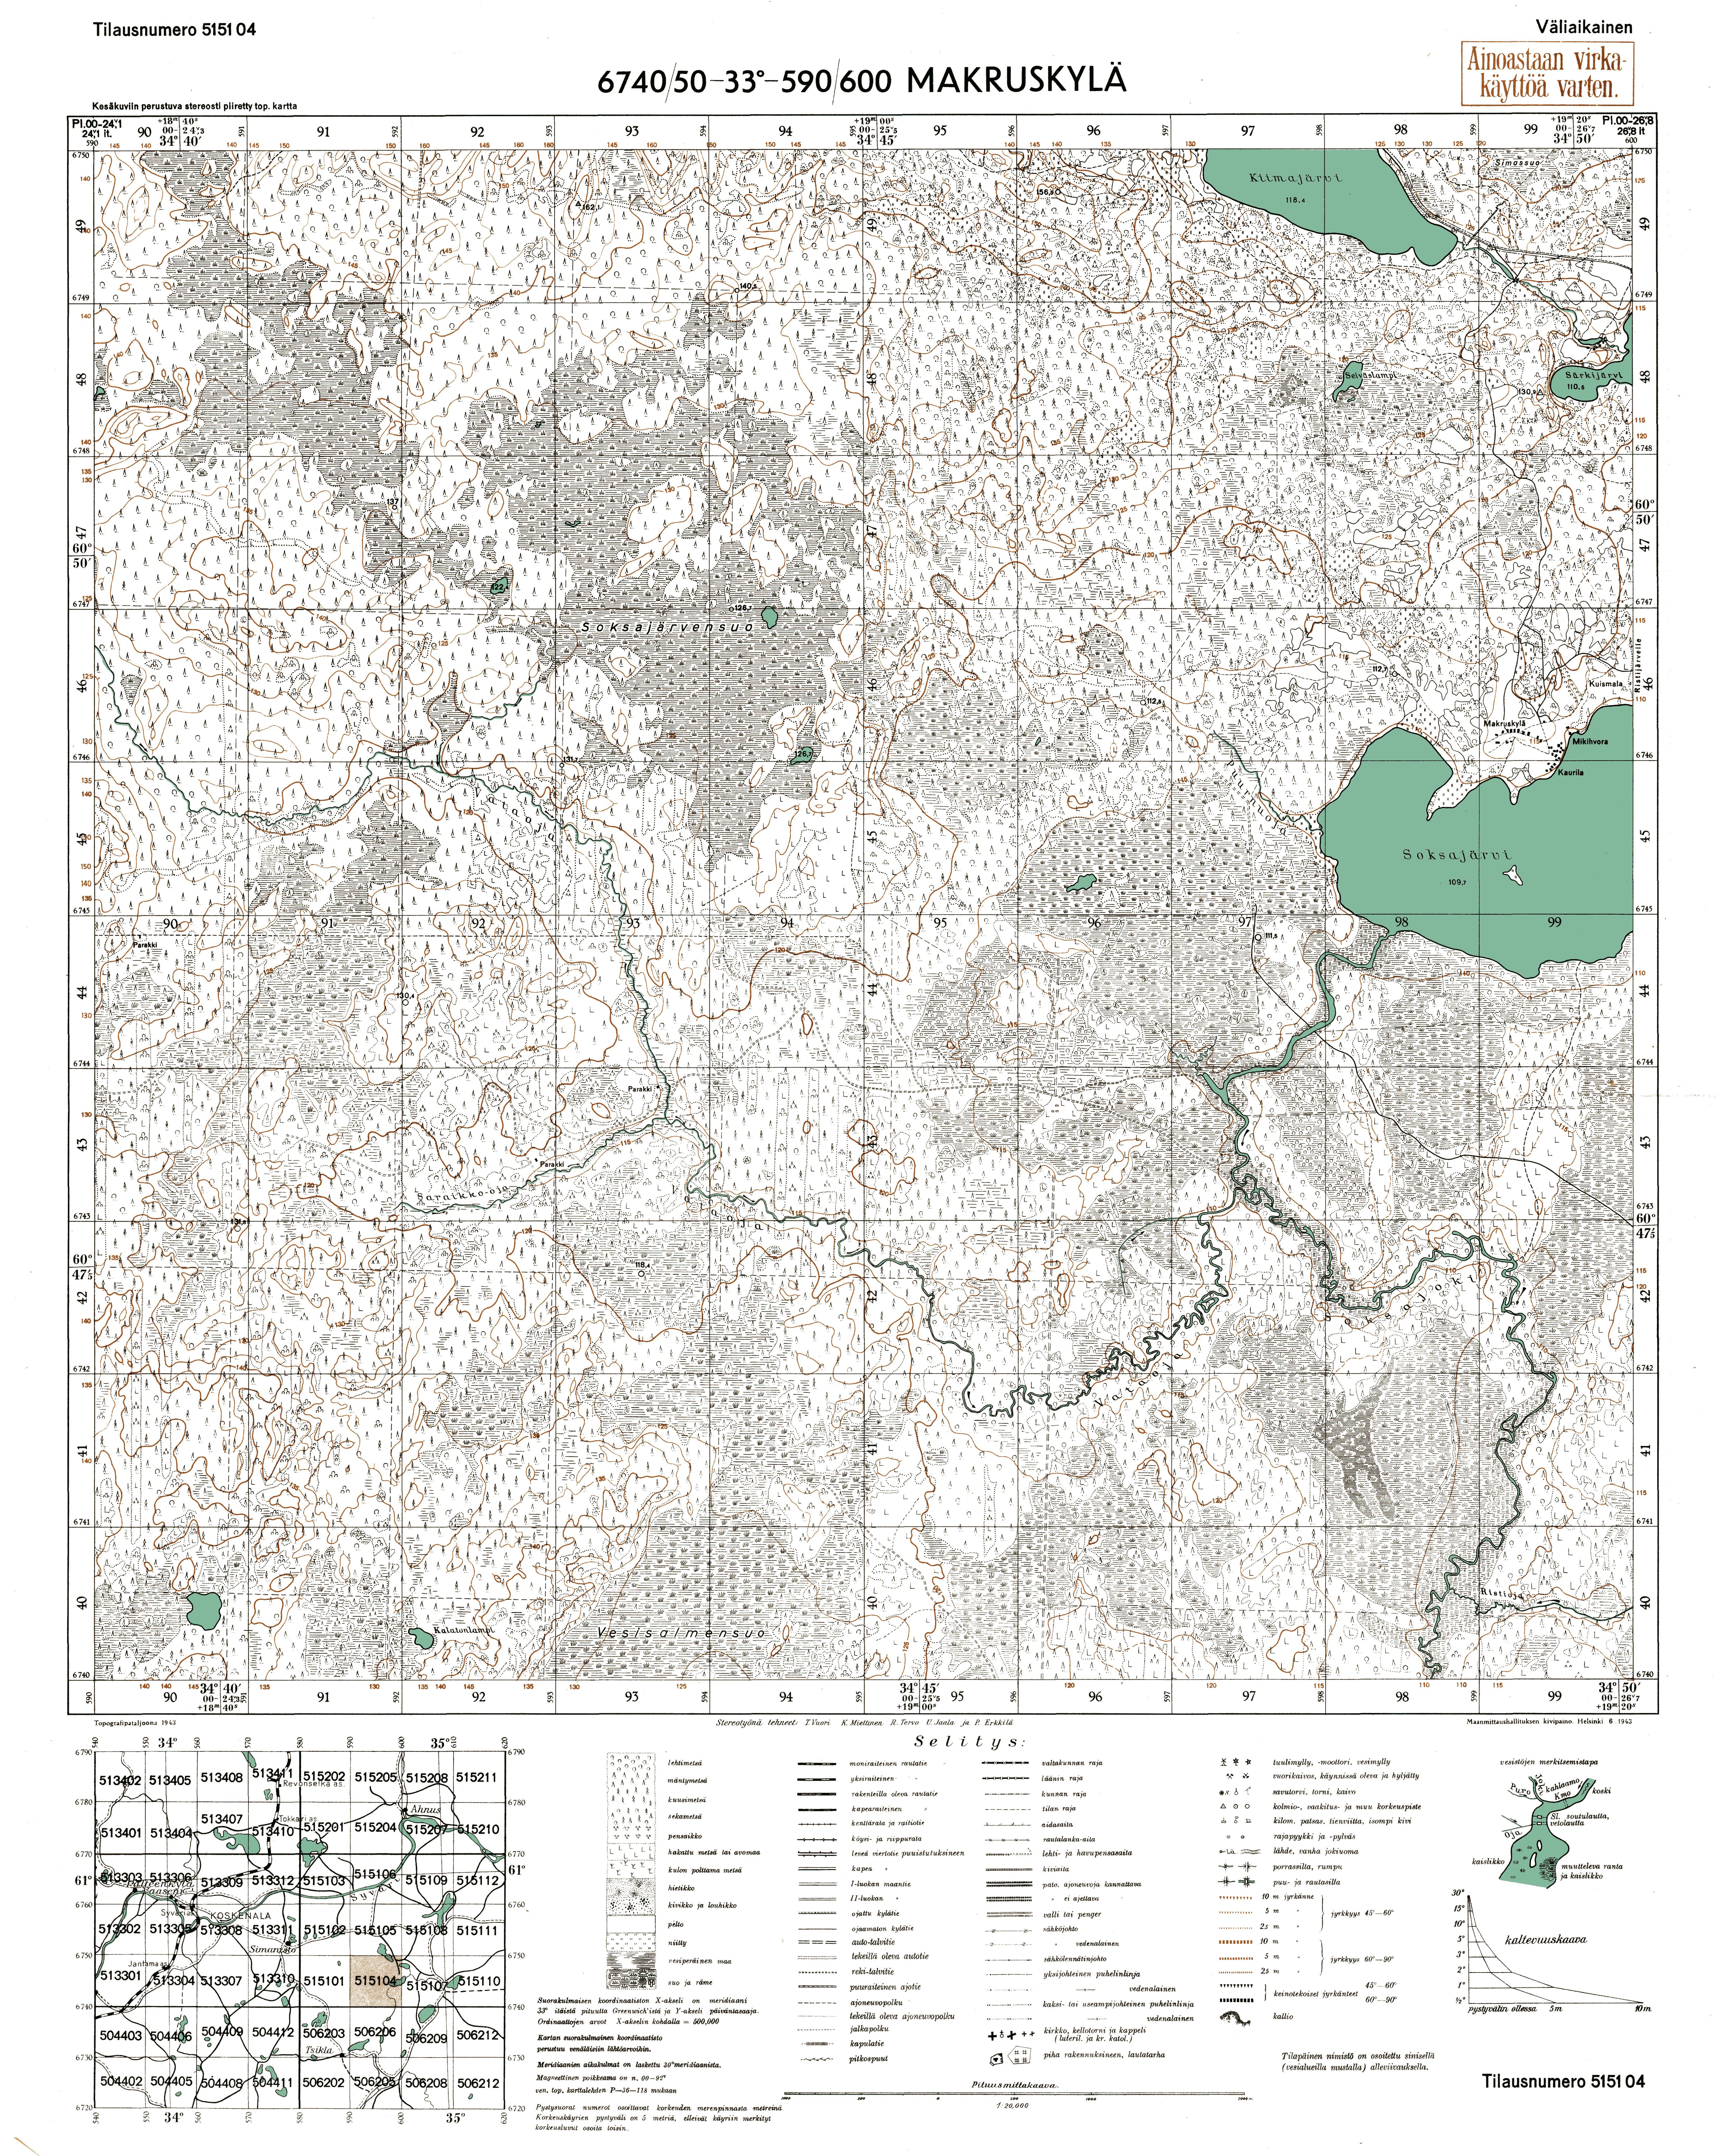 Nikiforovskoje Village Site. Makruskylä. Topografikartta 515104. Topographic map from 1943. Use the zooming tool to explore in higher level of detail. Obtain as a quality print or high resolution image